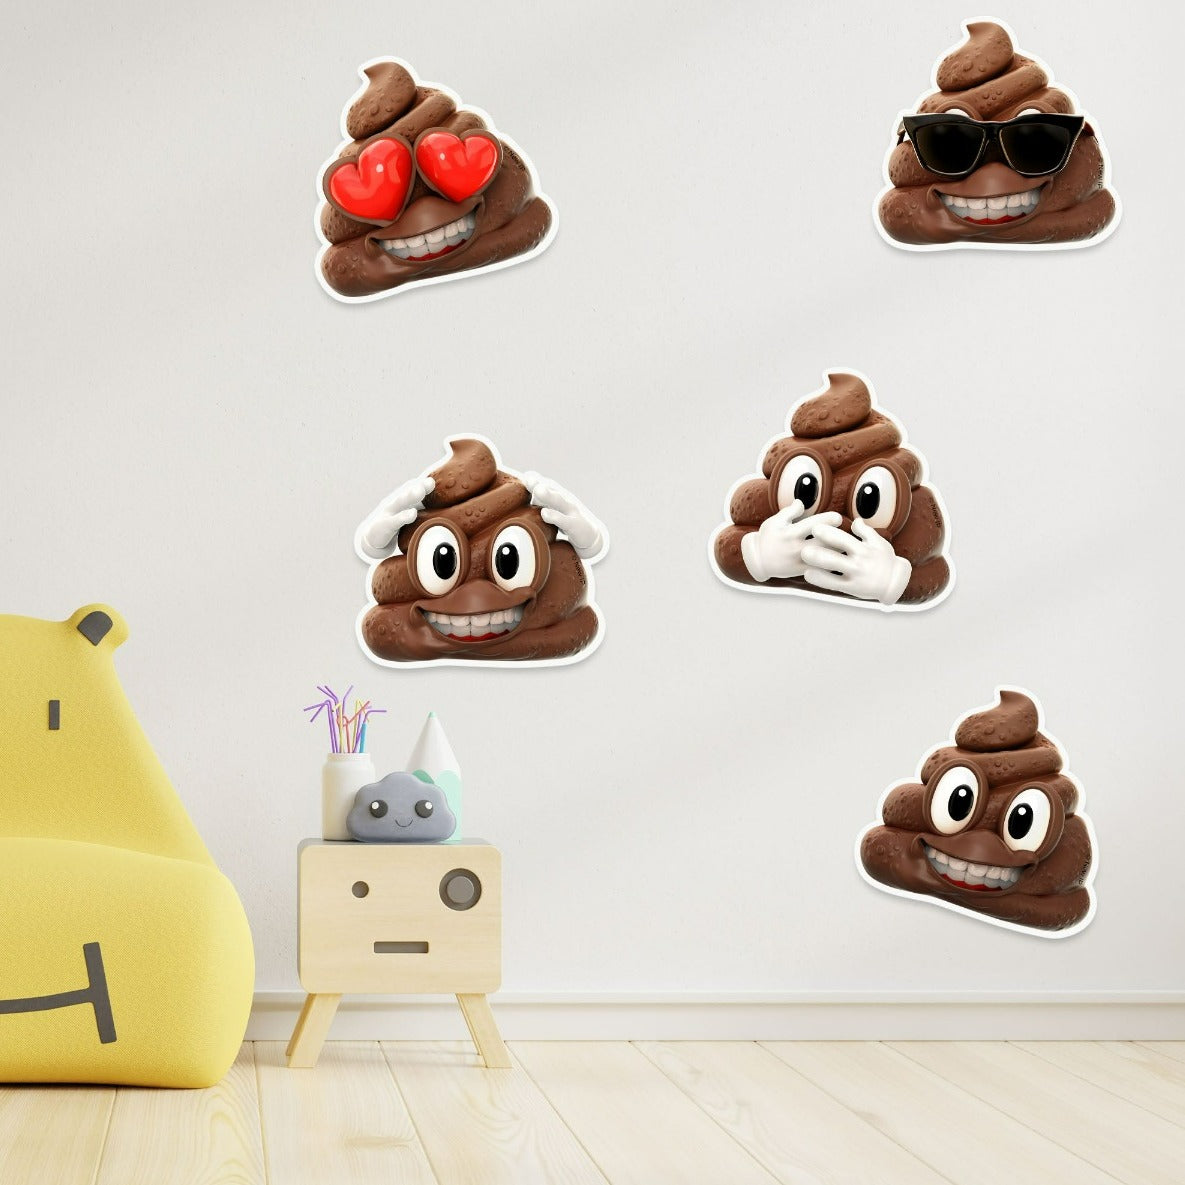 "Stick with Fun!" NEWMOJI Poop Wall Stickers, Set of 5 - Whimsical Wall Decor